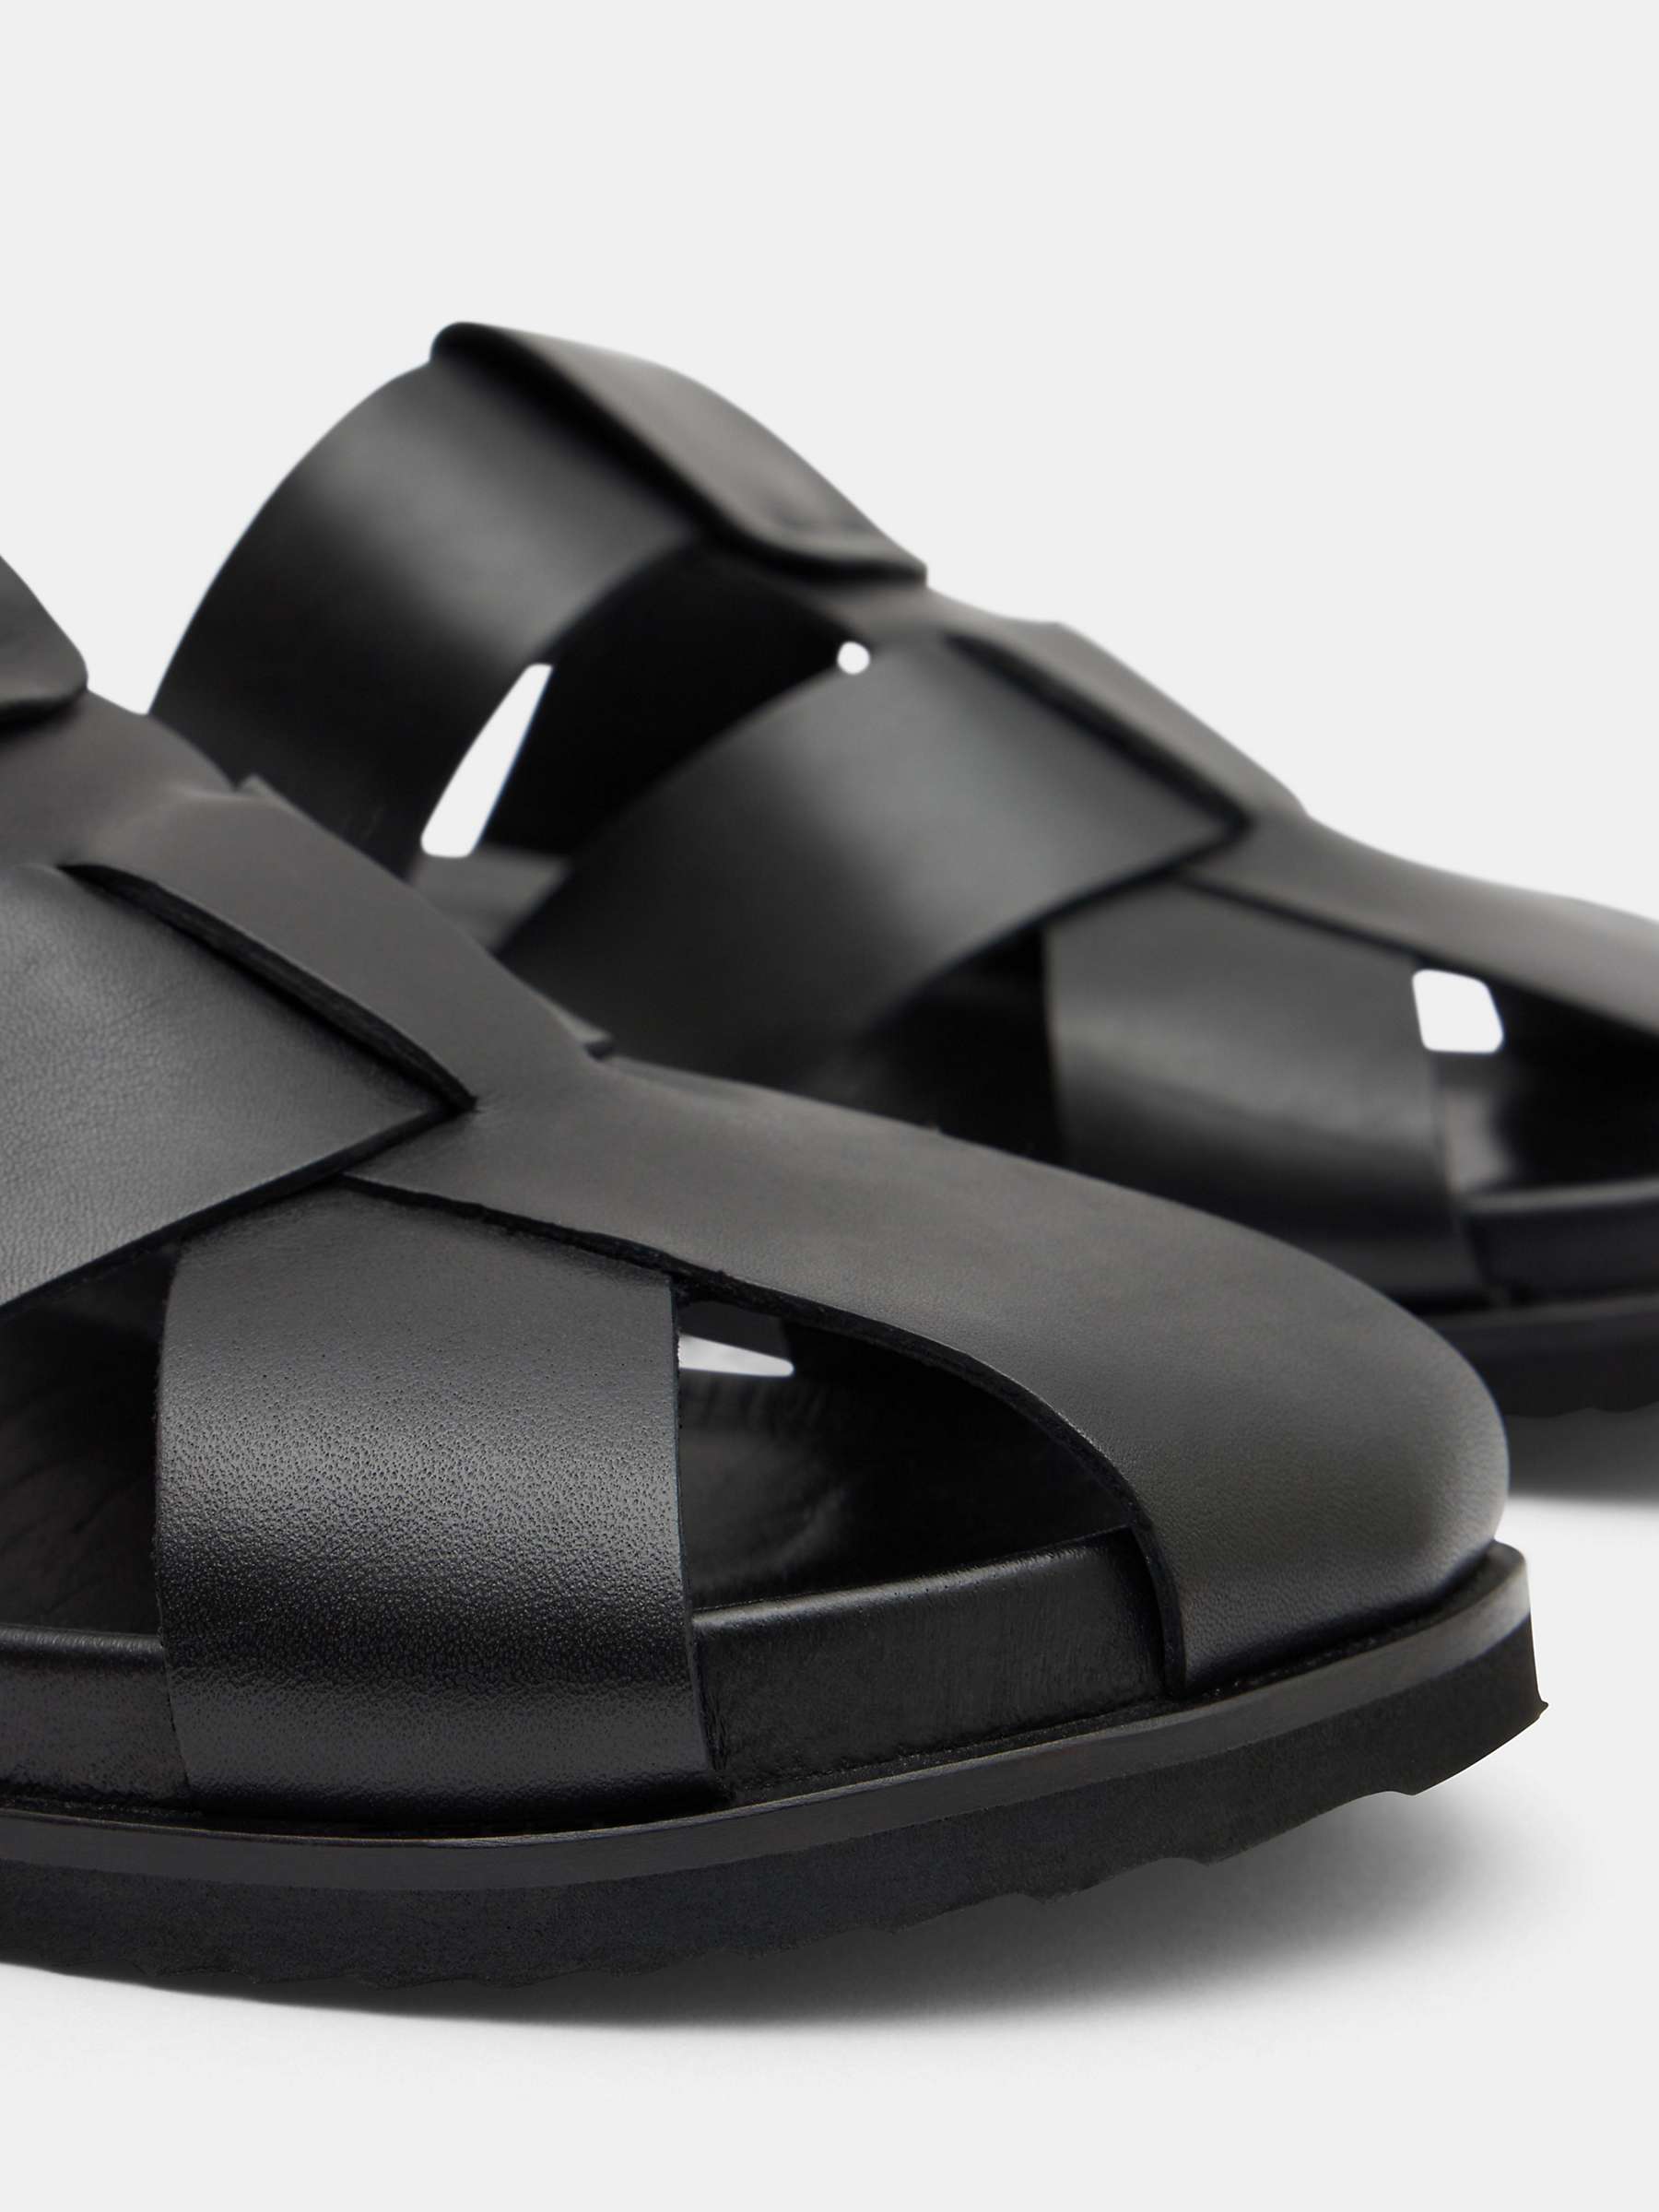 Buy HUSH Cora Closed Toe Leather Cage Sandals, Black Online at johnlewis.com